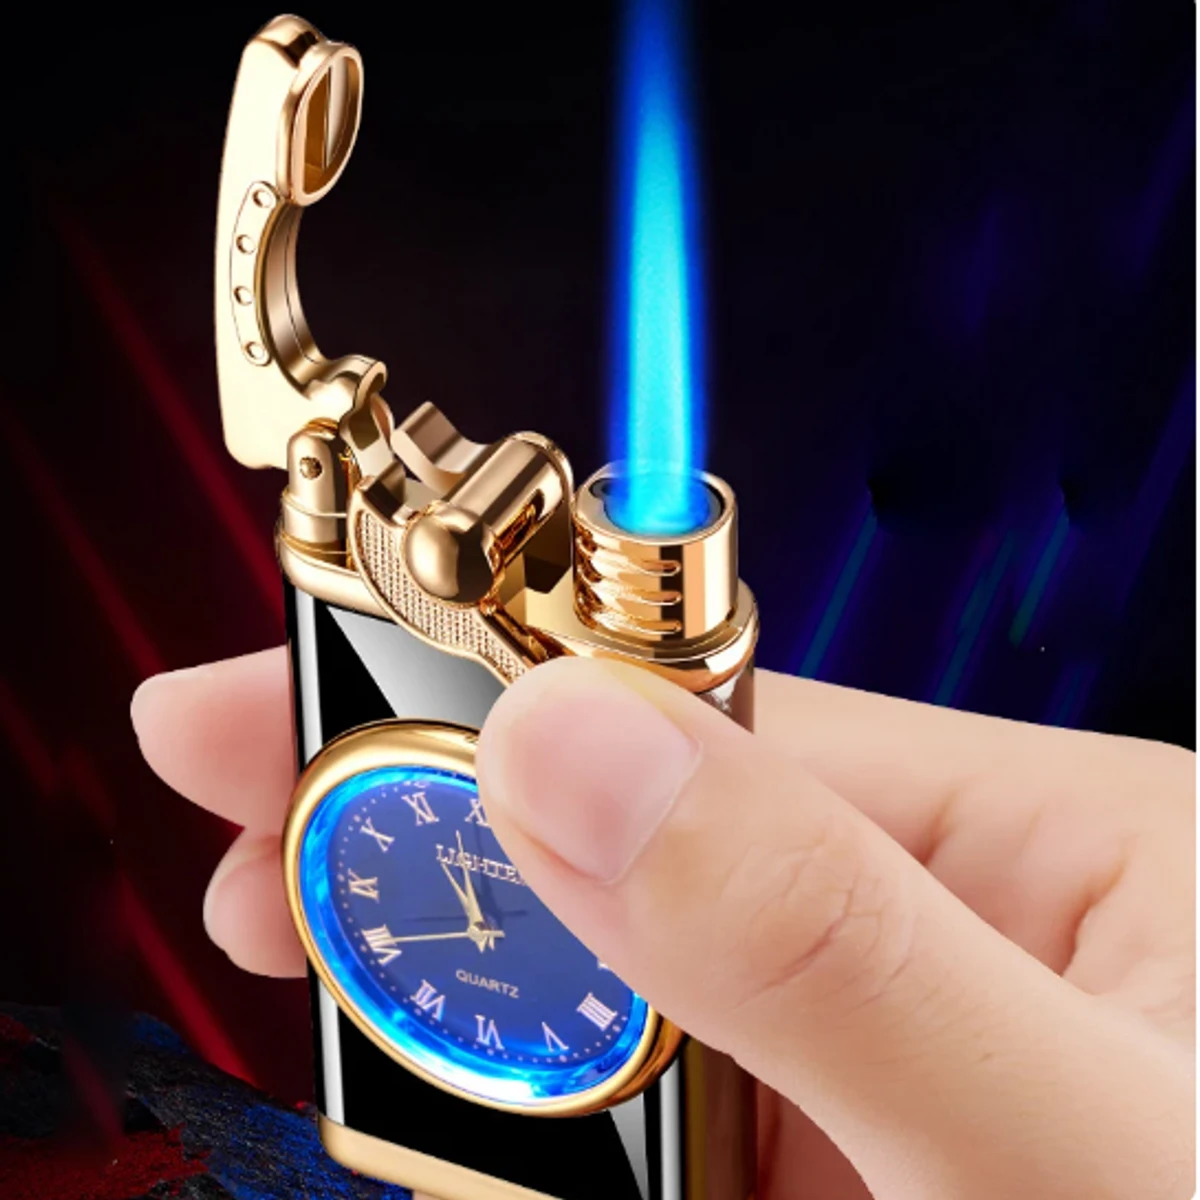 Watch Cigarette Lighter-in-one Body Multi-purpose LED Flashing Lamp